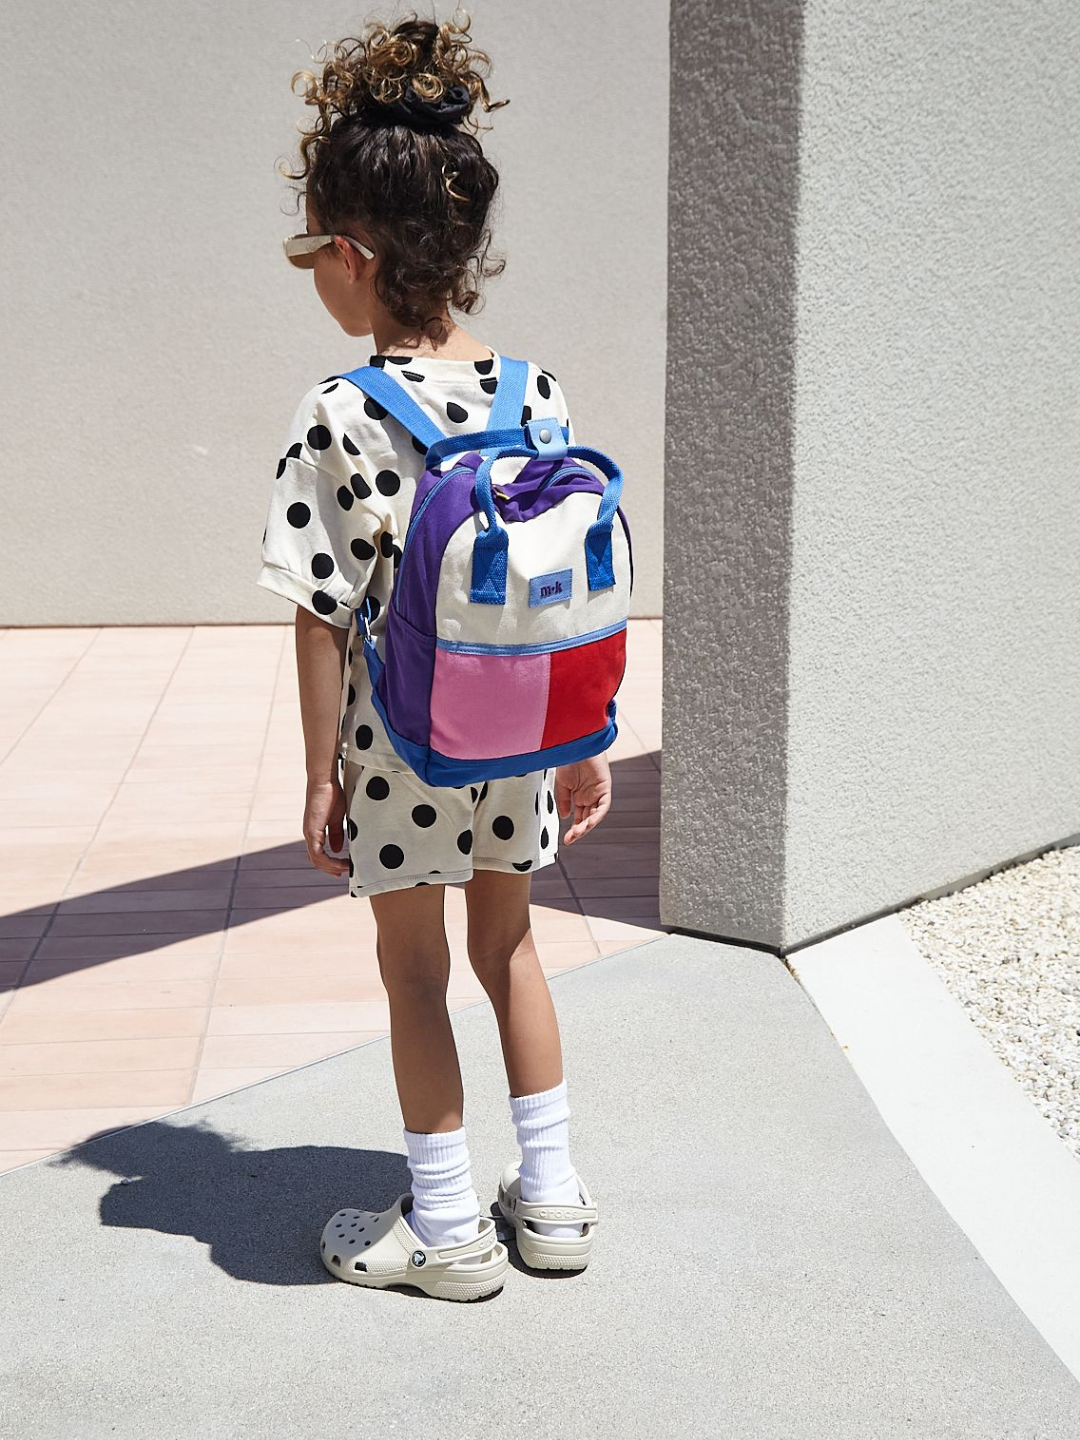 Coral Reef | A child wearing a colorblock backpack with bright blue straps, handles and base, purple sides, and one pink and one red patch under a cream top